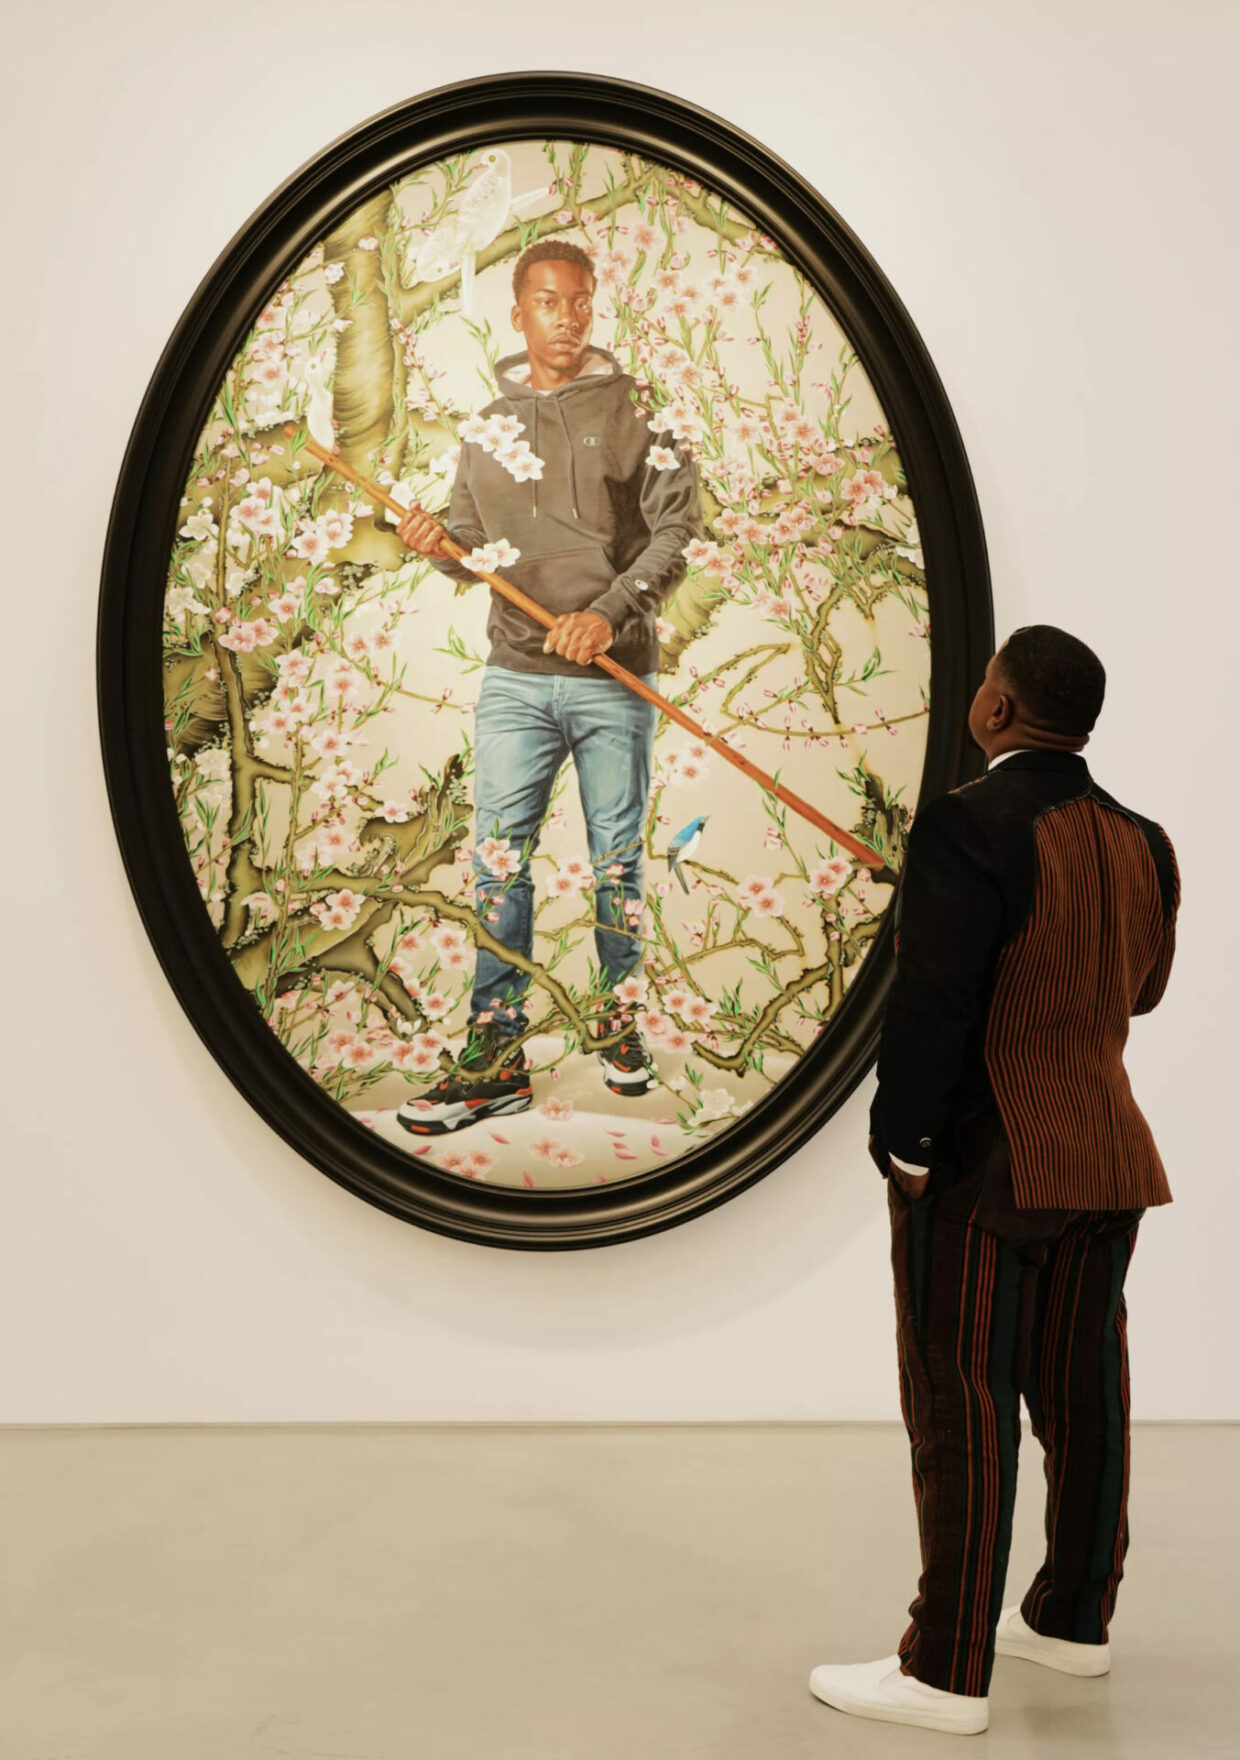 Kehinde Wiley is reaching for a new language of grace | 3